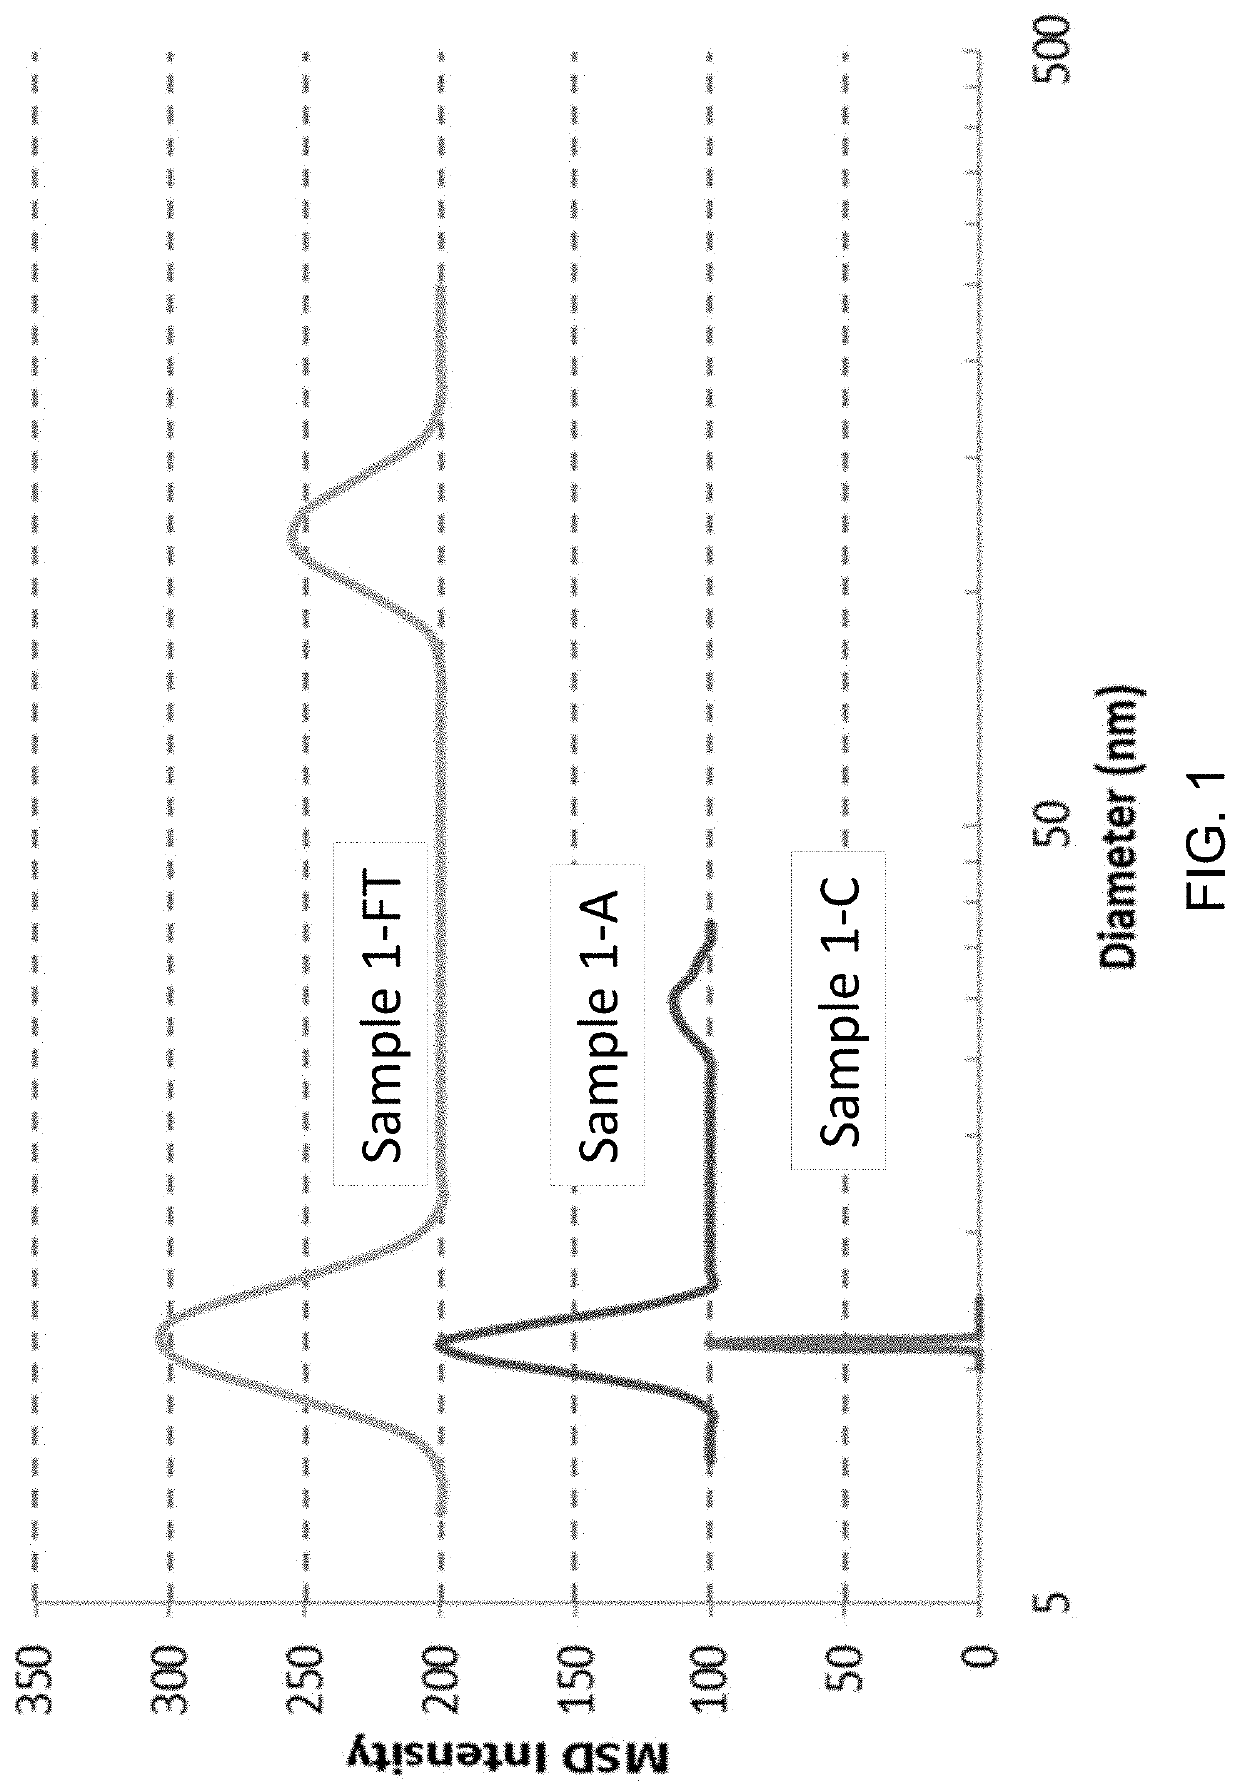 Excipient compounds for protein formulations